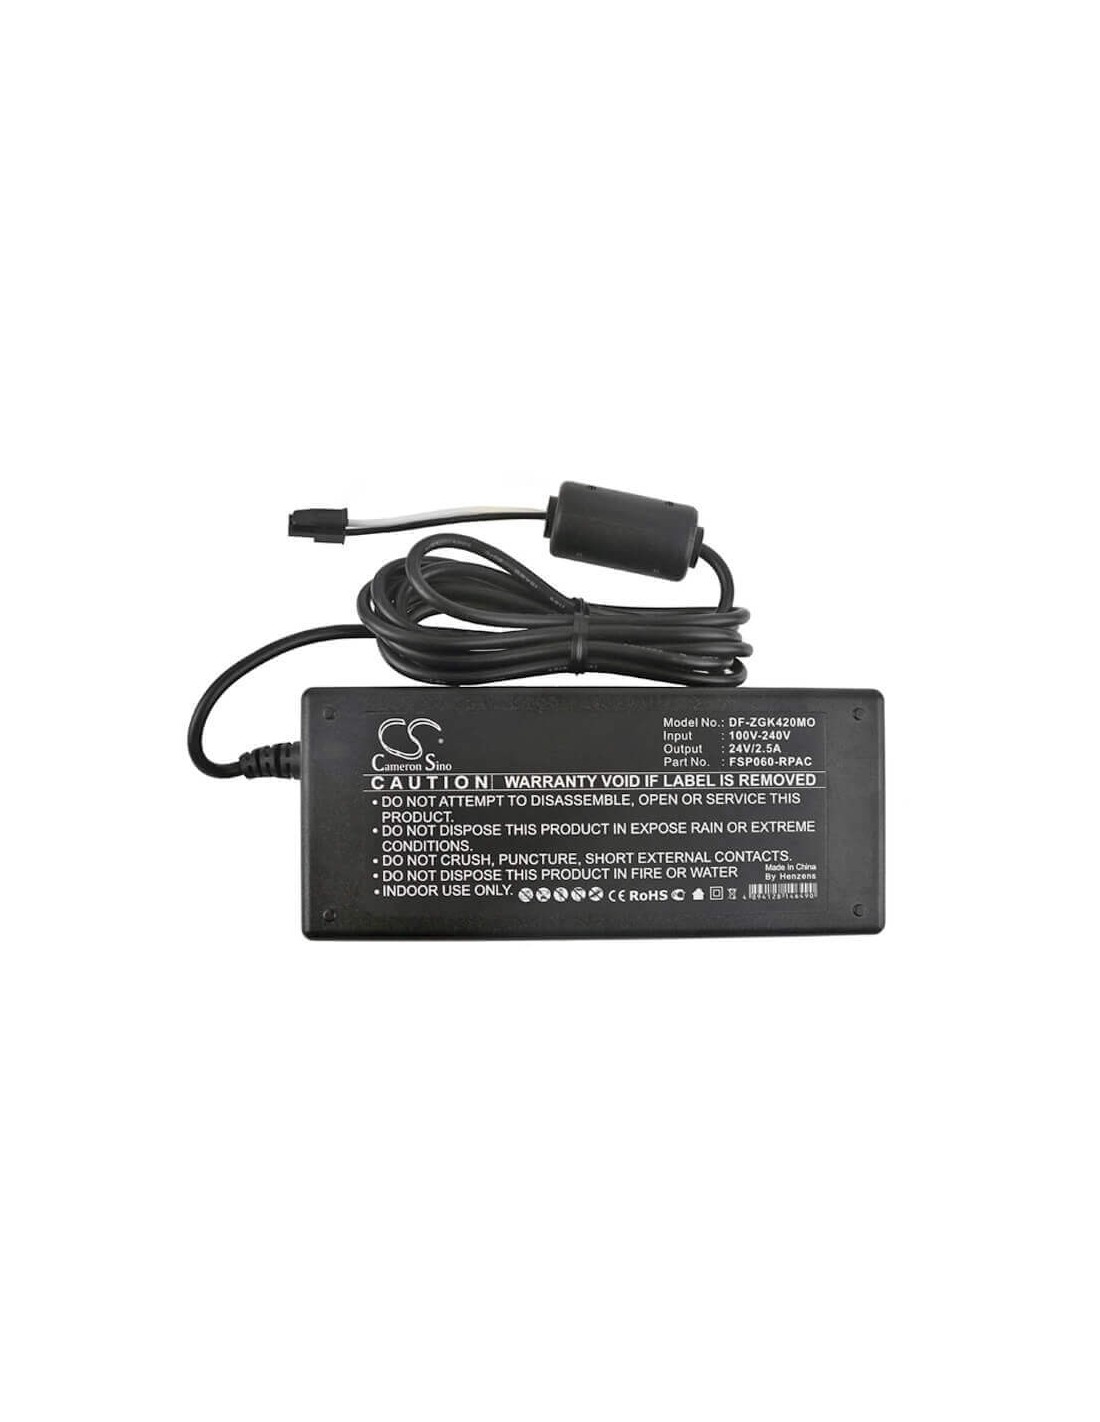 Battery Charger for Zebra, Fsp060-rpac, Gk420, Gk420d